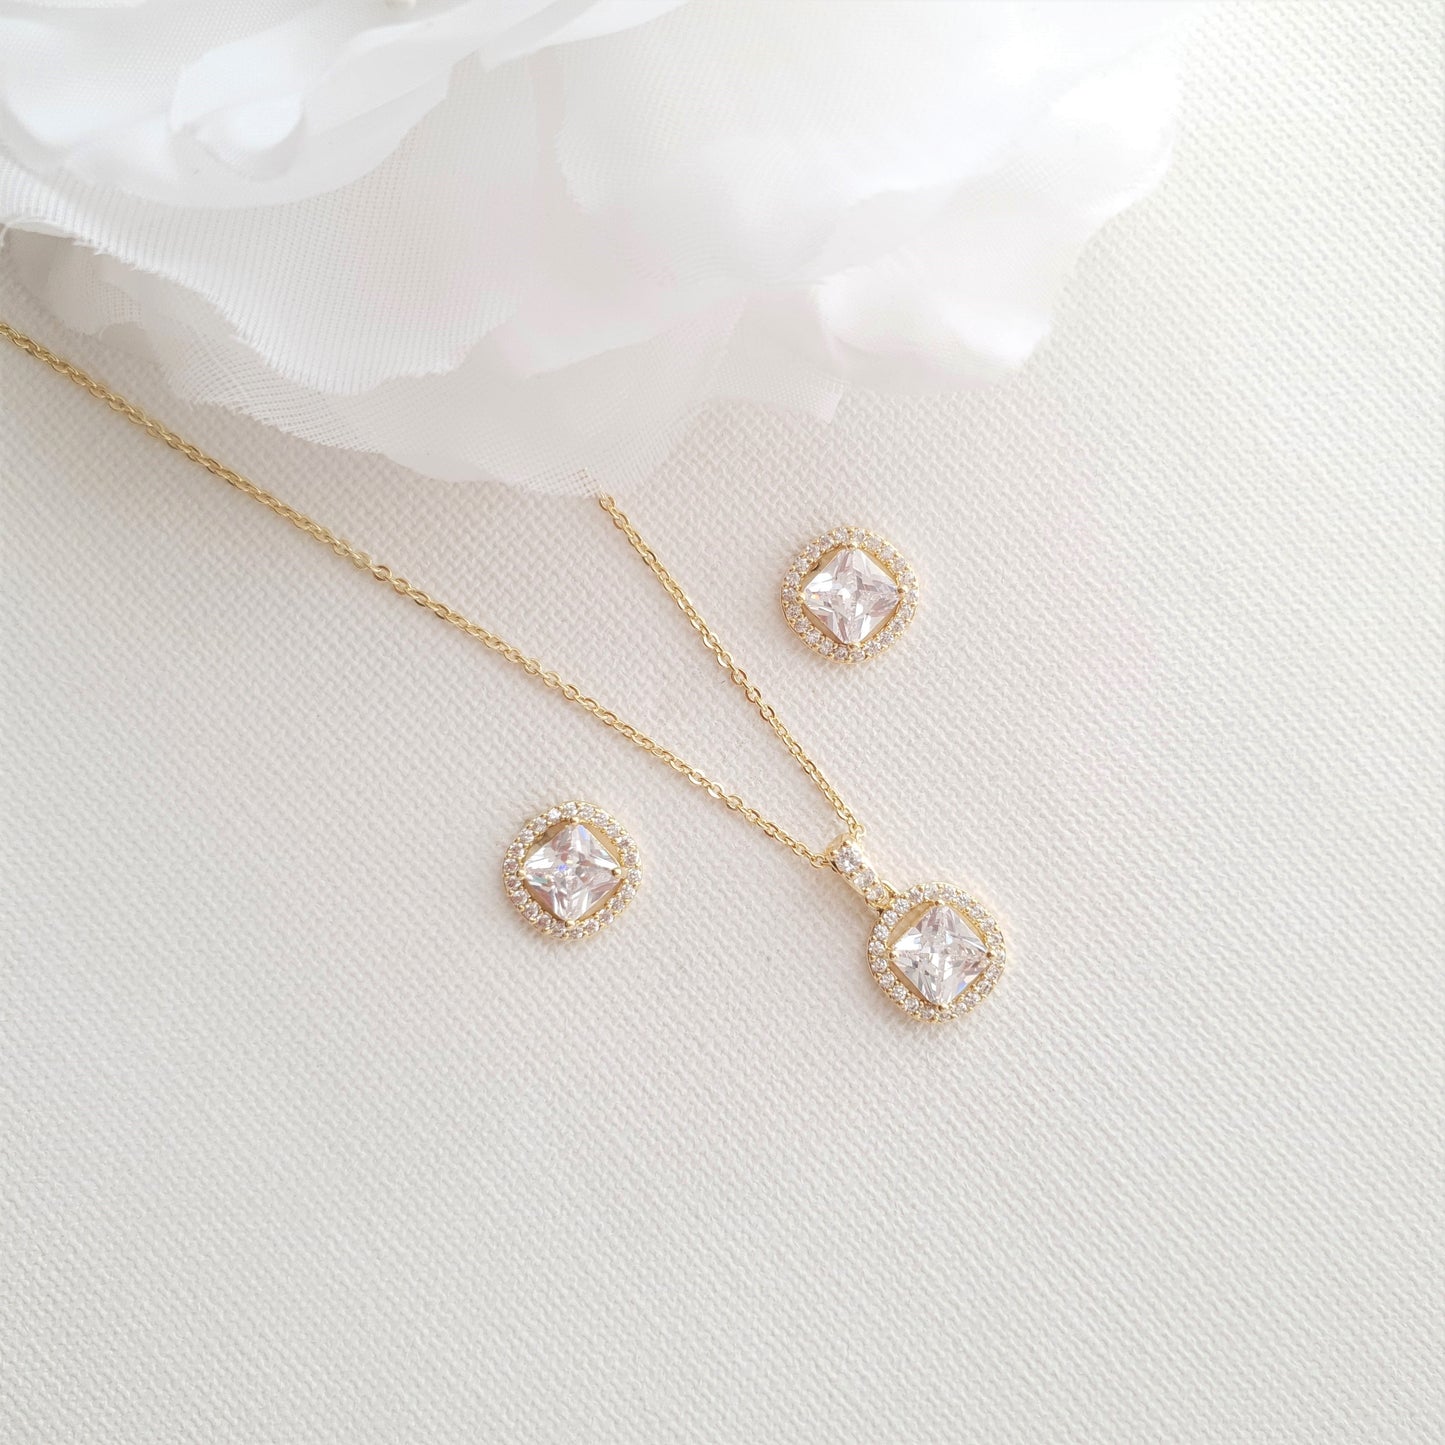 Gold Bridesmaids Jewelry Sets-Piper